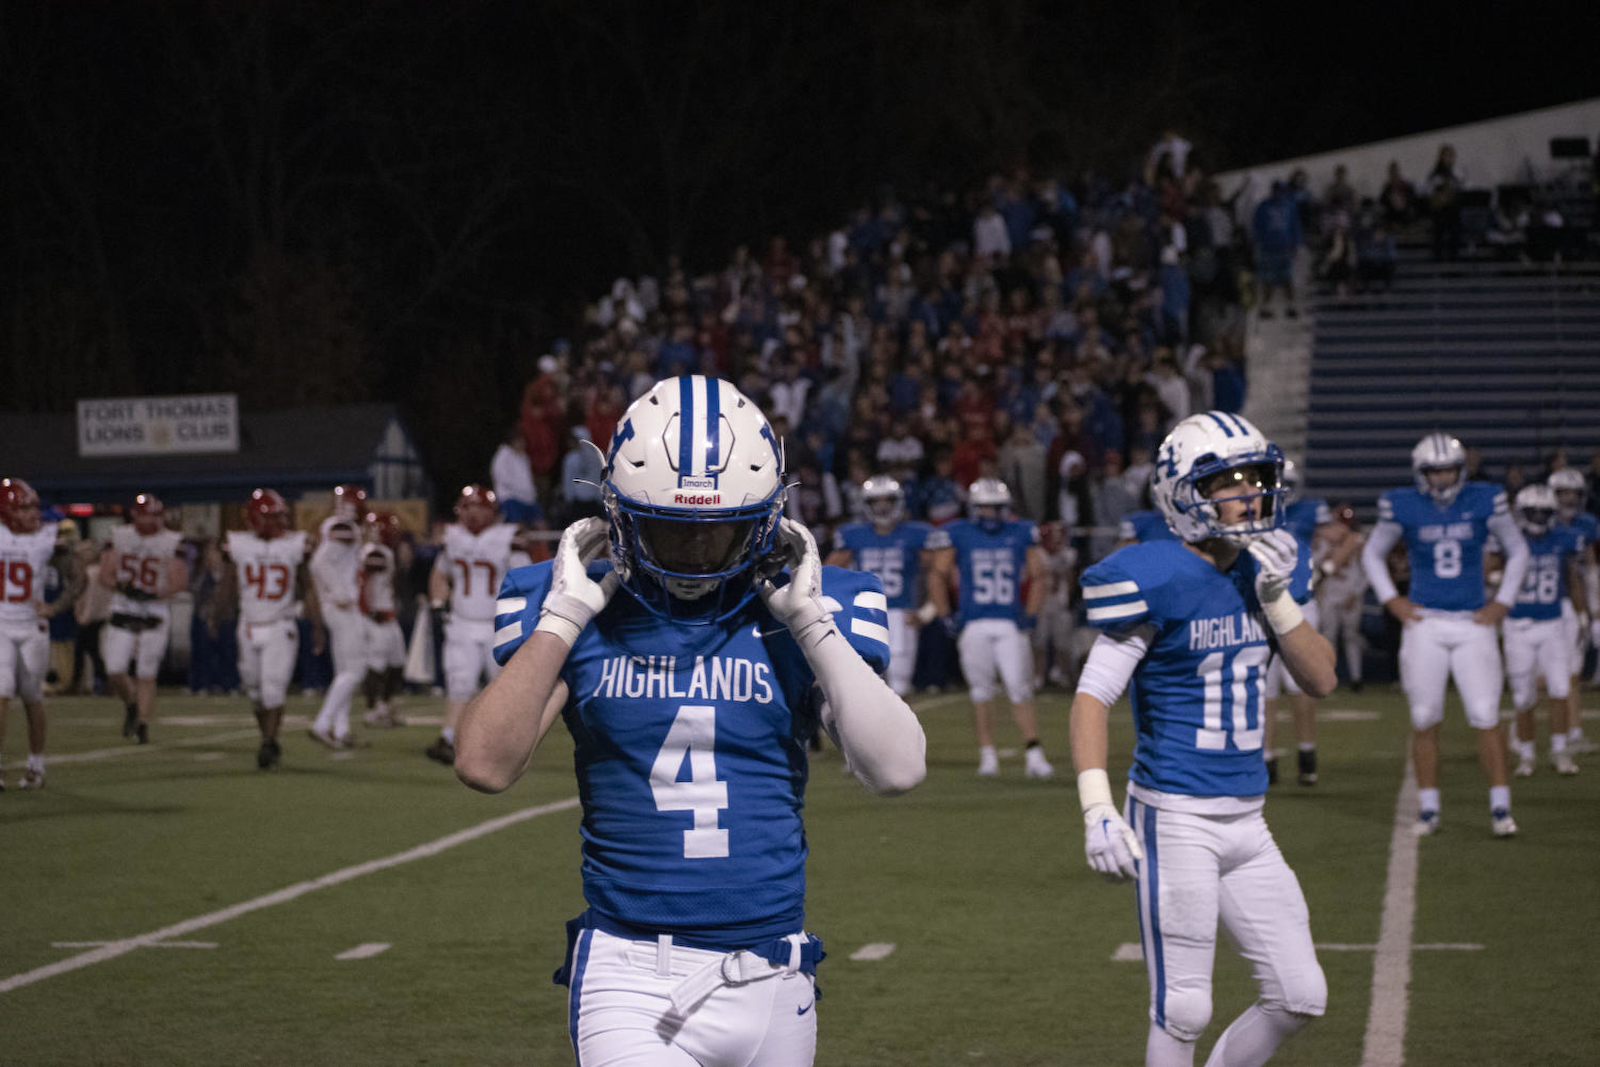 Highlands football loses 2nd round of state playoffs to Scott County:Kiara Raaker, Staff|November 18, 2022 gallery cover photo